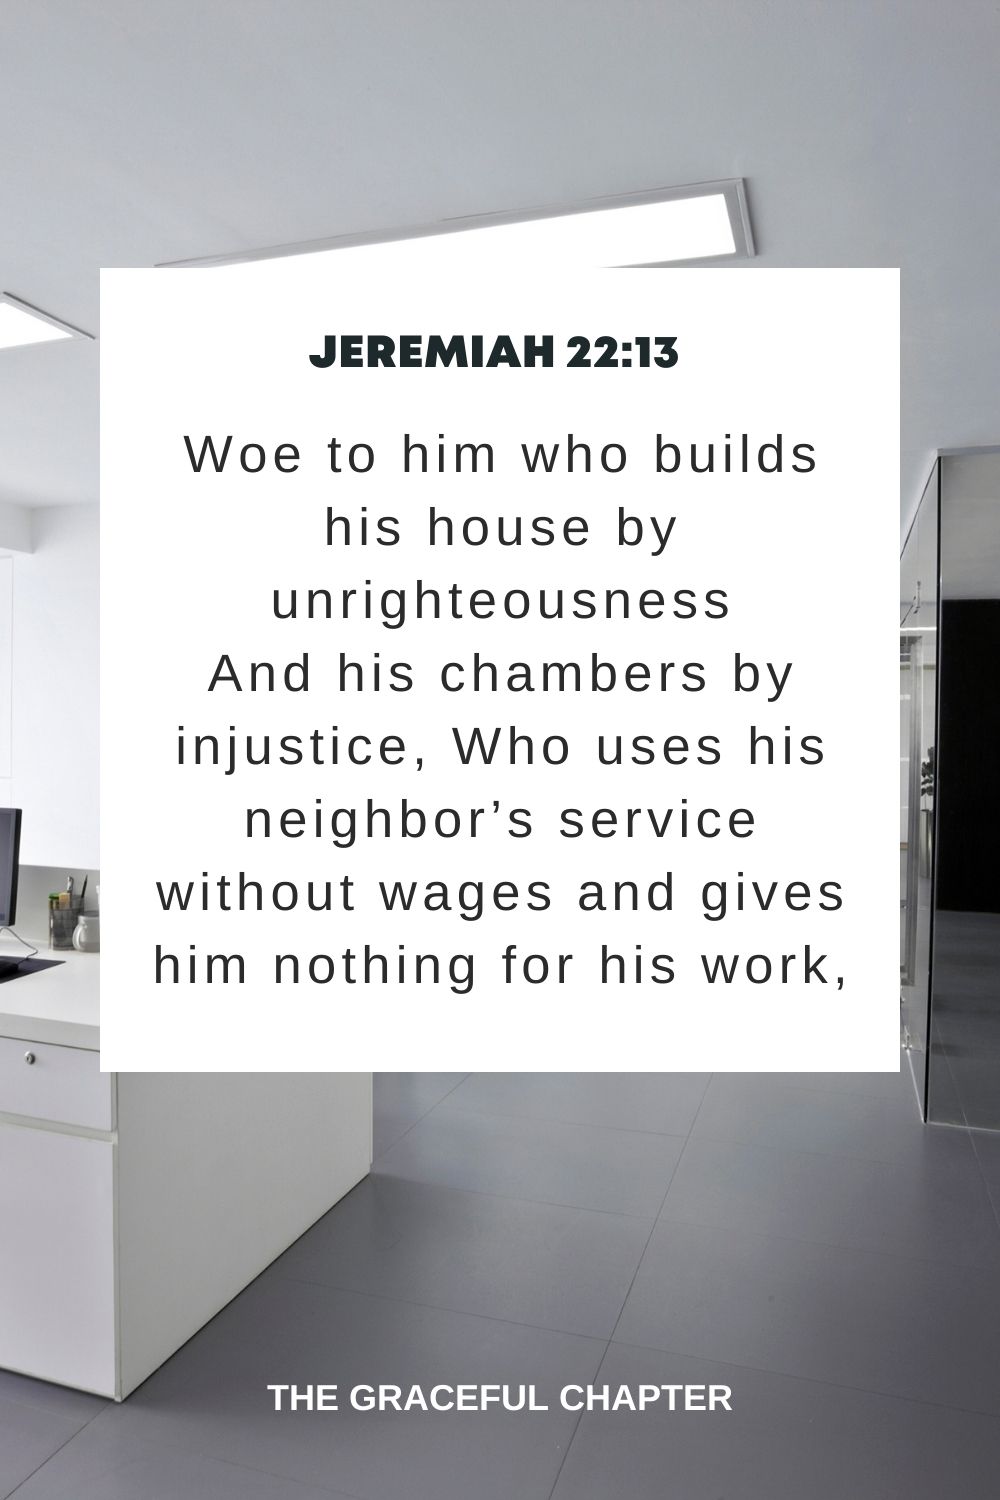 Woe to him who builds his house by unrighteousness And his chambers by injustice, Who uses his neighbor’s service without wages and gives him nothing for his work, Jeremiah 22:13